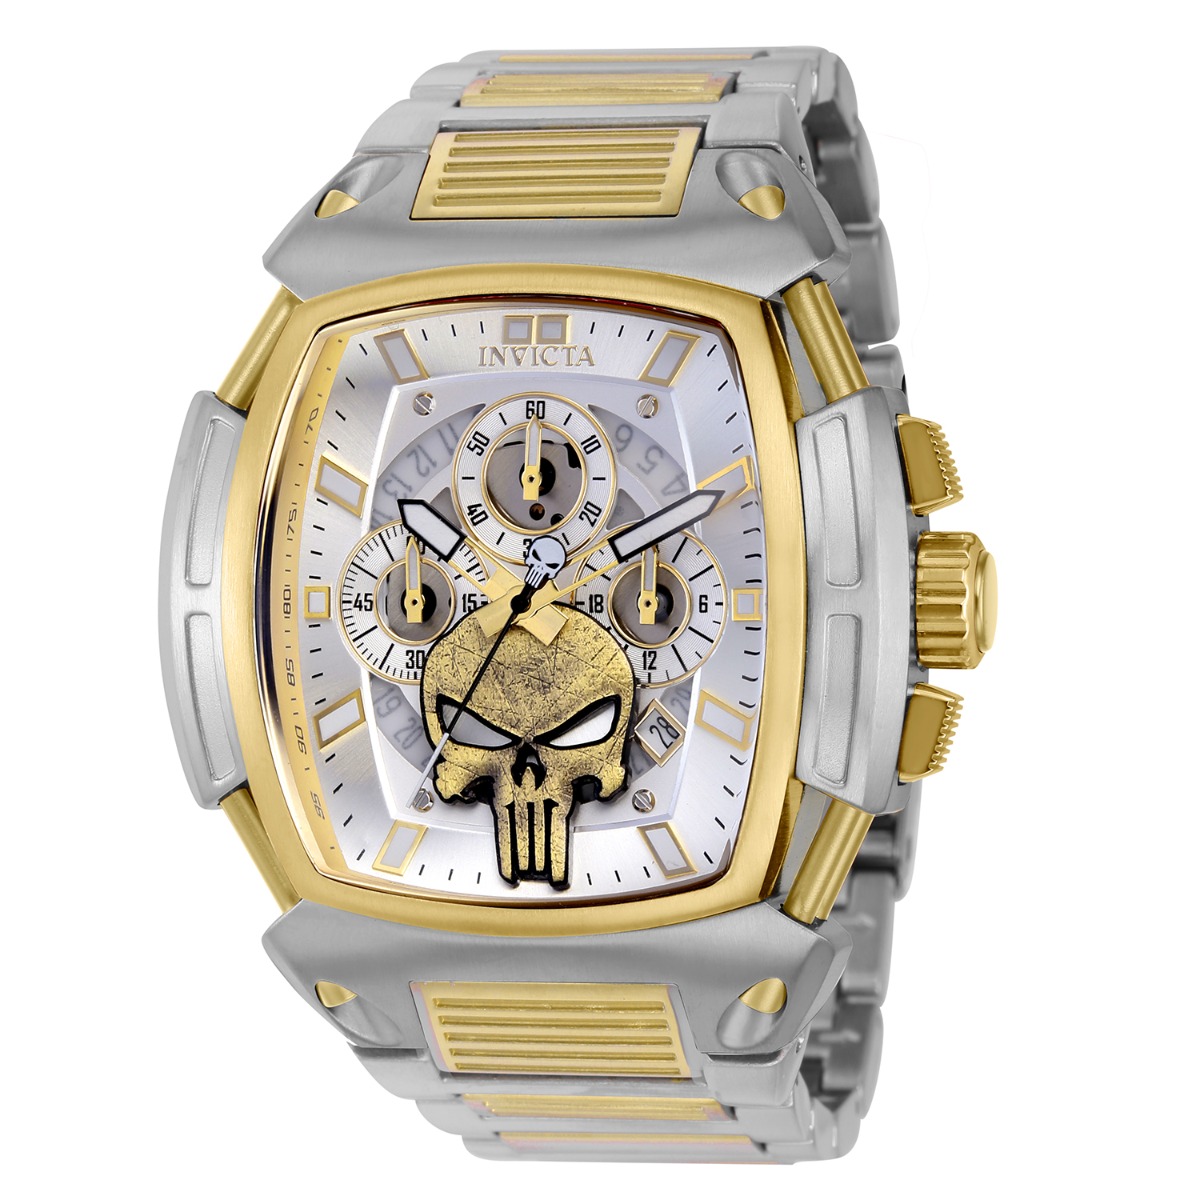 Invicta Watch NHL - Pittsburgh Penguins 42646 - Official Invicta Store -  Buy Online!